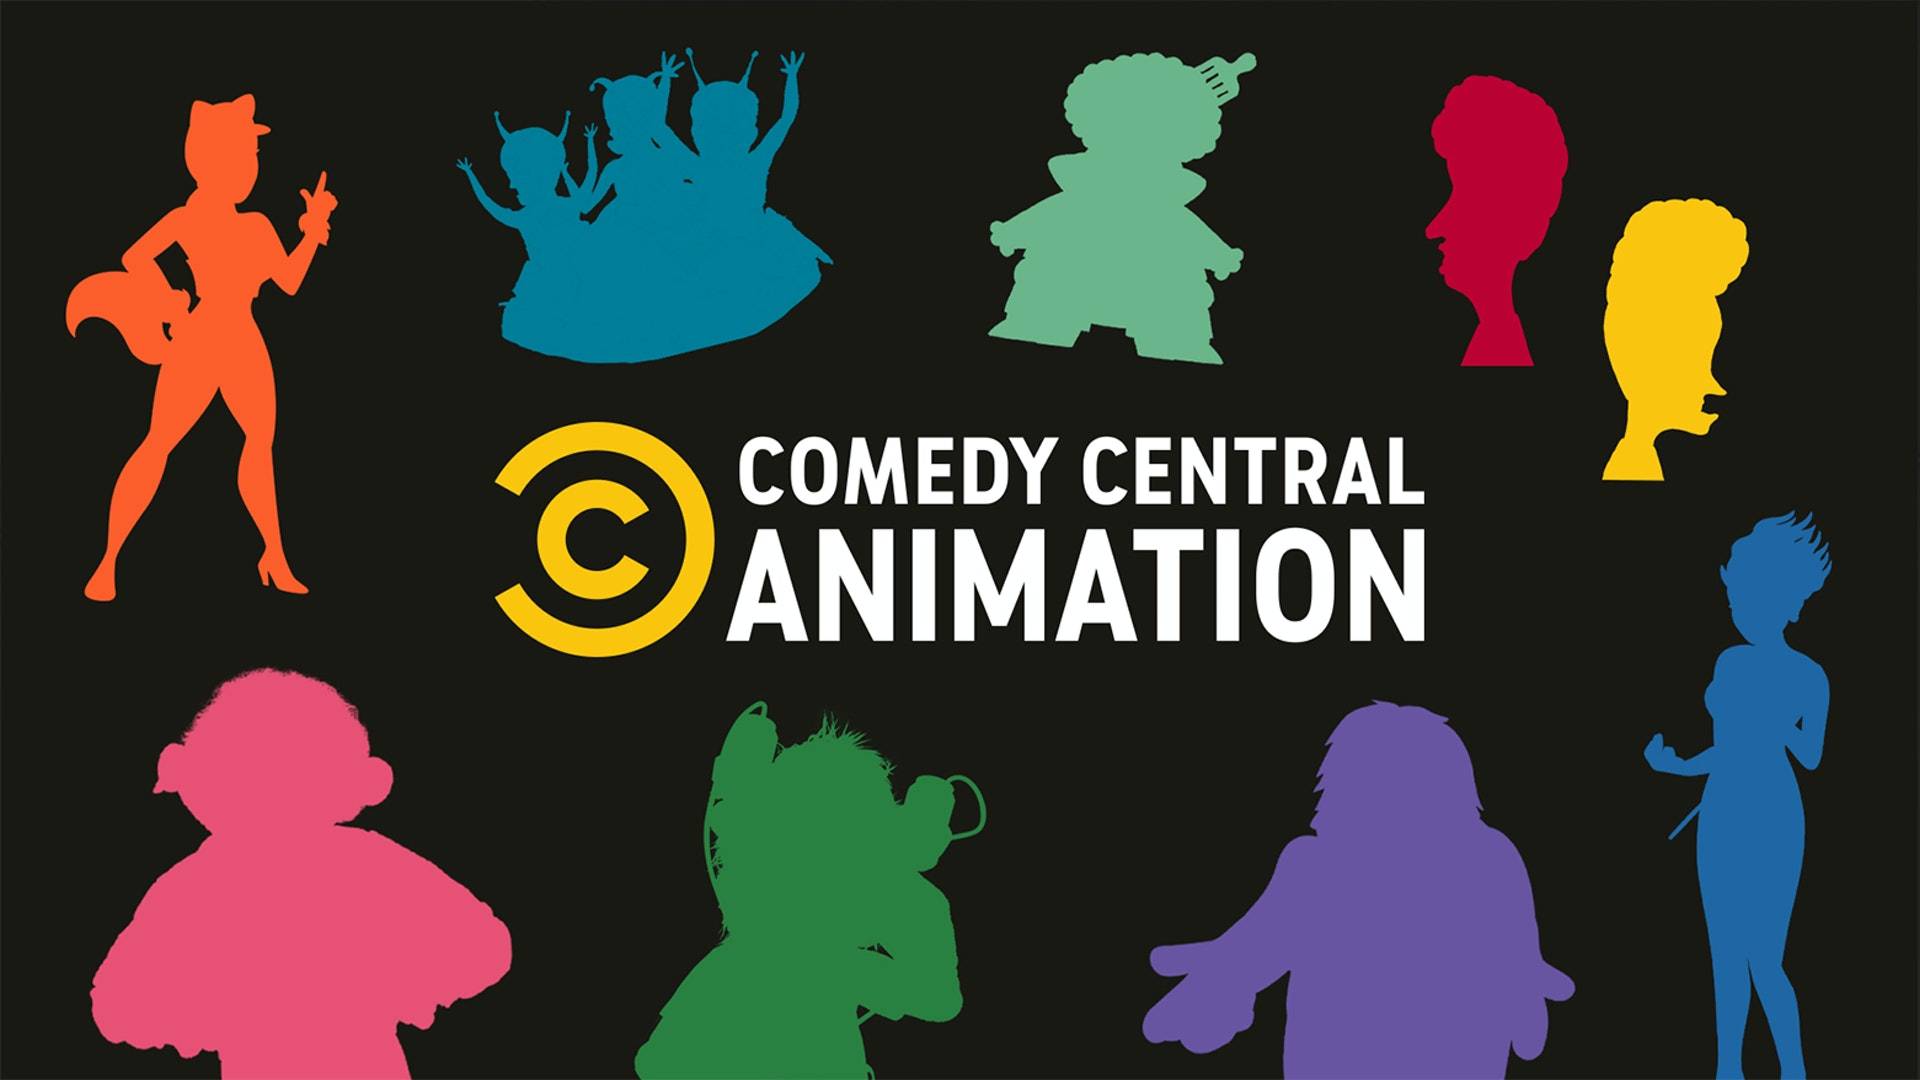 Watch The Comedy Central Animation Channel On Pluto TV